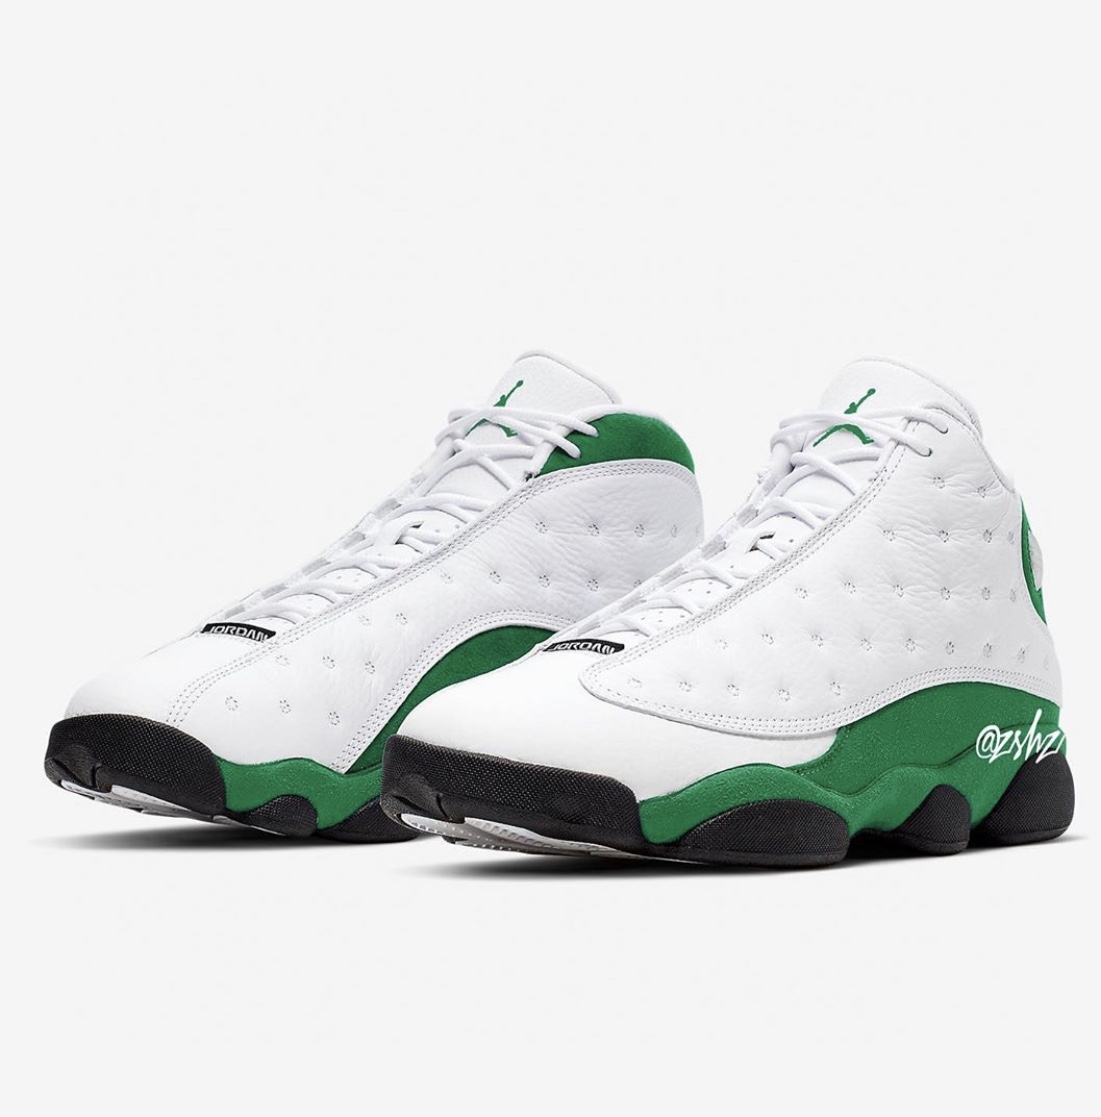 White and Green Air Jordan 13 on the way in 2020 | Sneaker Shop Talk